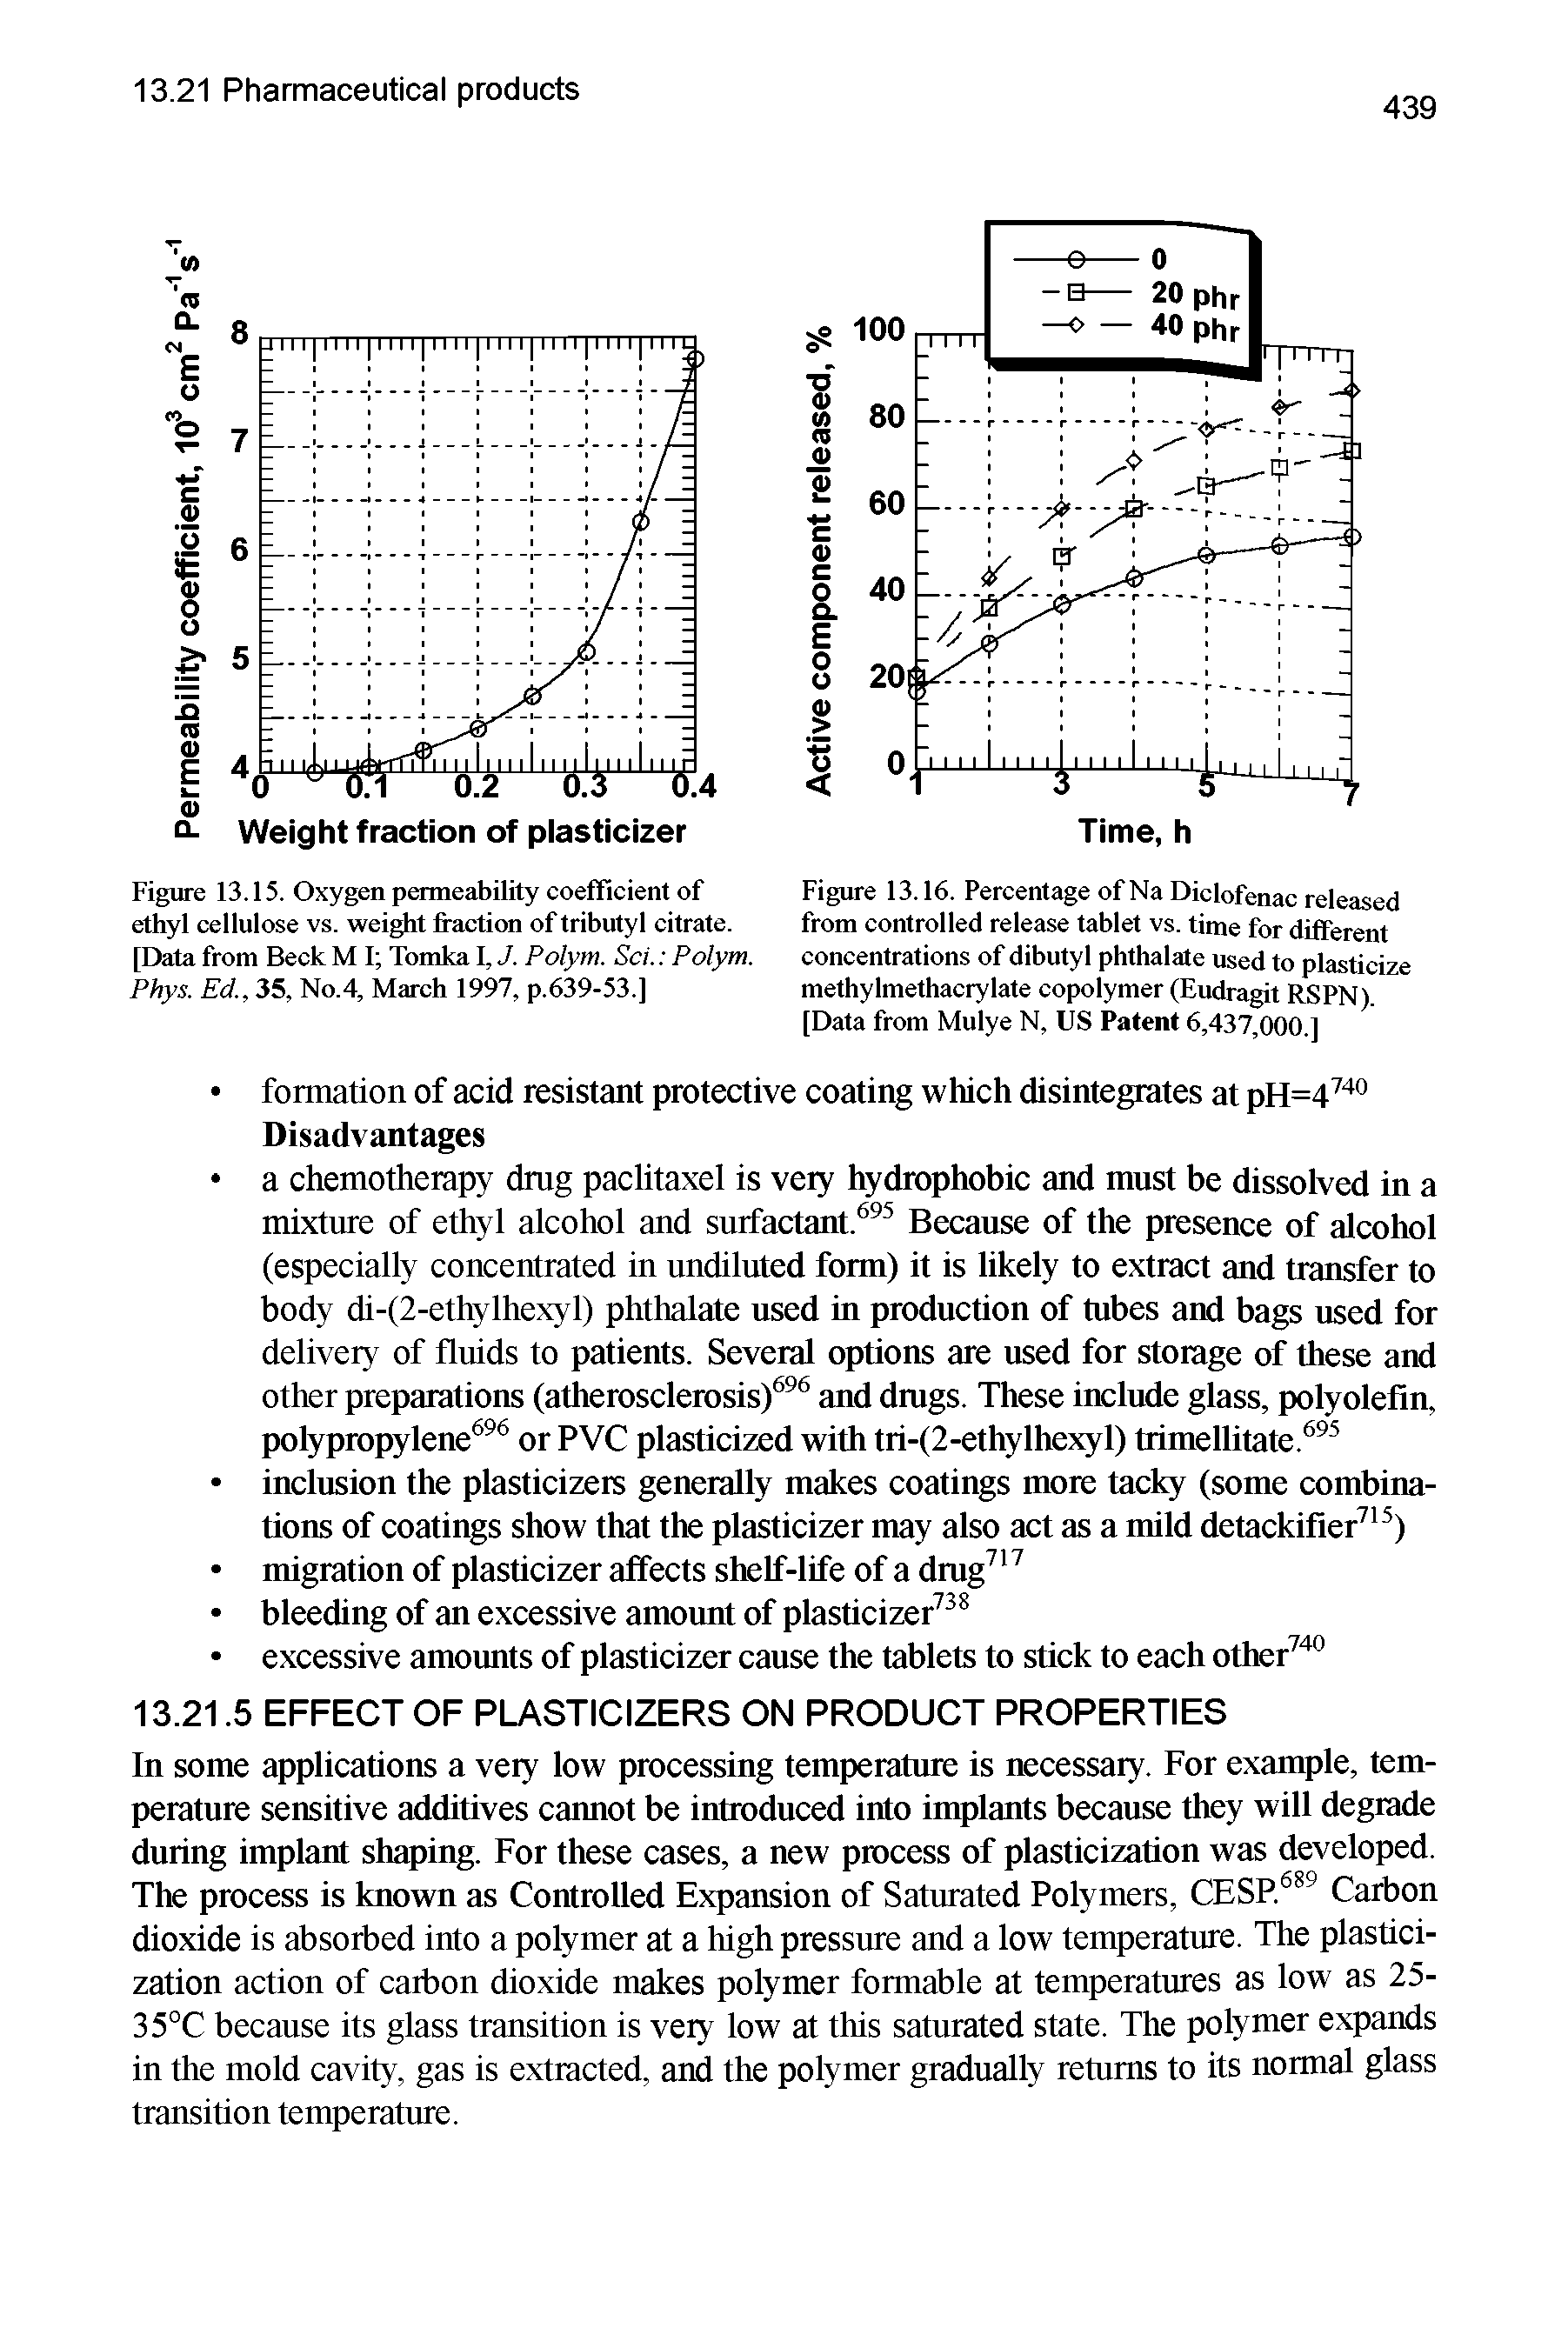 Figure 13.15. Oxygen permeability coefficient of ethyl cellulose vs. weight fraction of tributyl citrate. [Data from Beck M 1 Tomka 1, J. Polym. Sci. Polym. Phys. Ed, 35, No.4, March 1997, p.639-53.]...